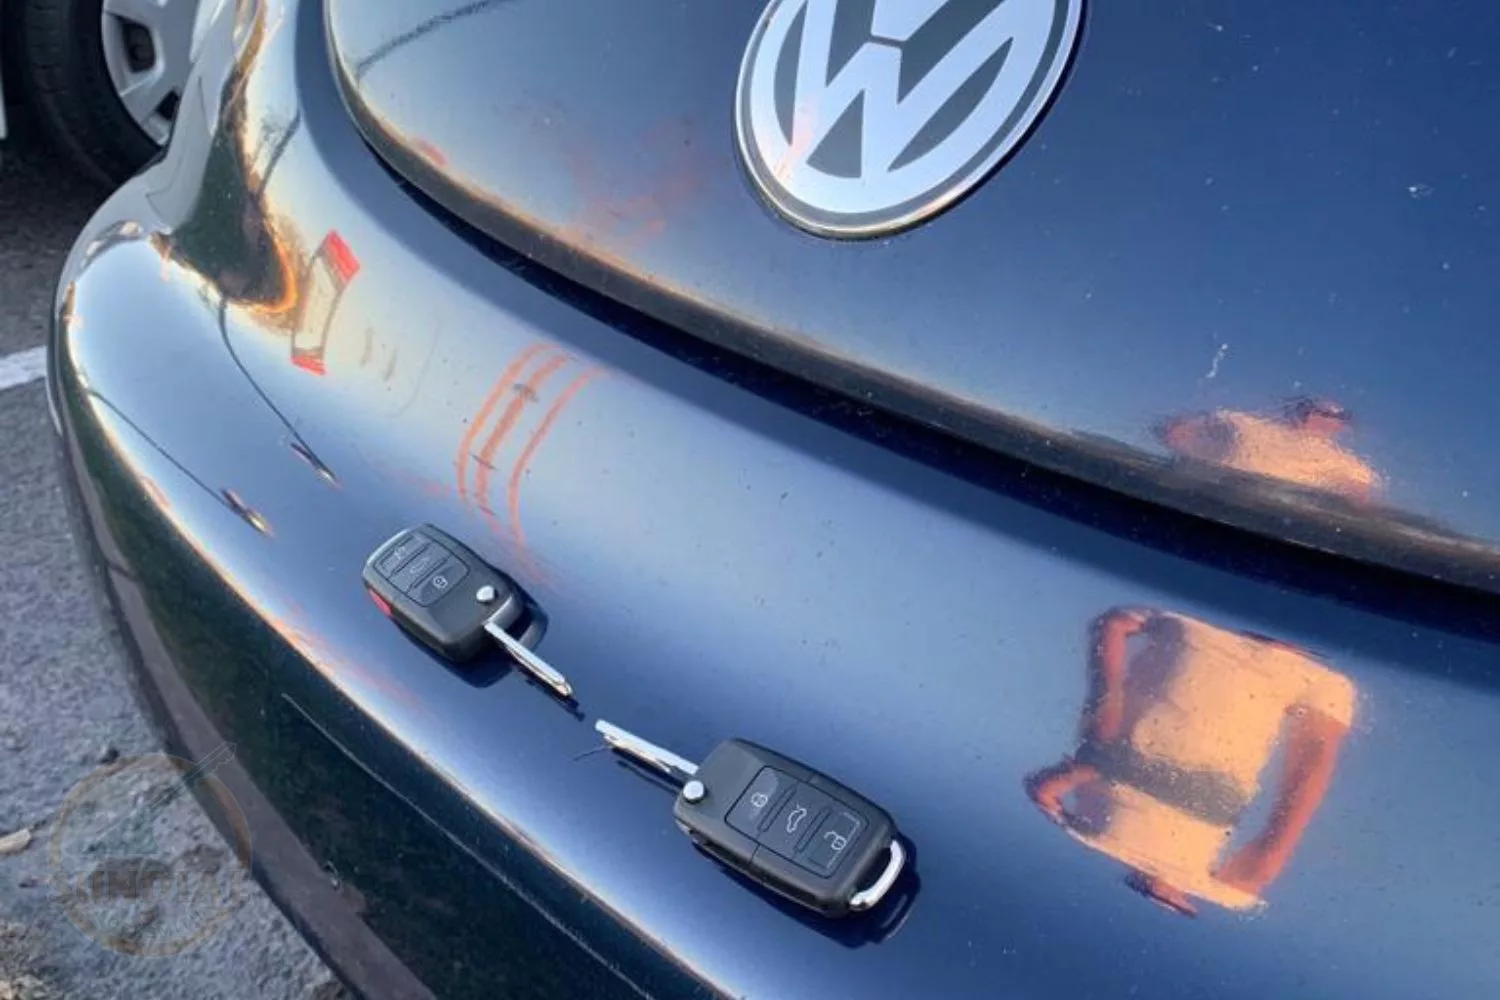 Close-up of a Volkswagen car emblem with two car keys dangling on its surface.